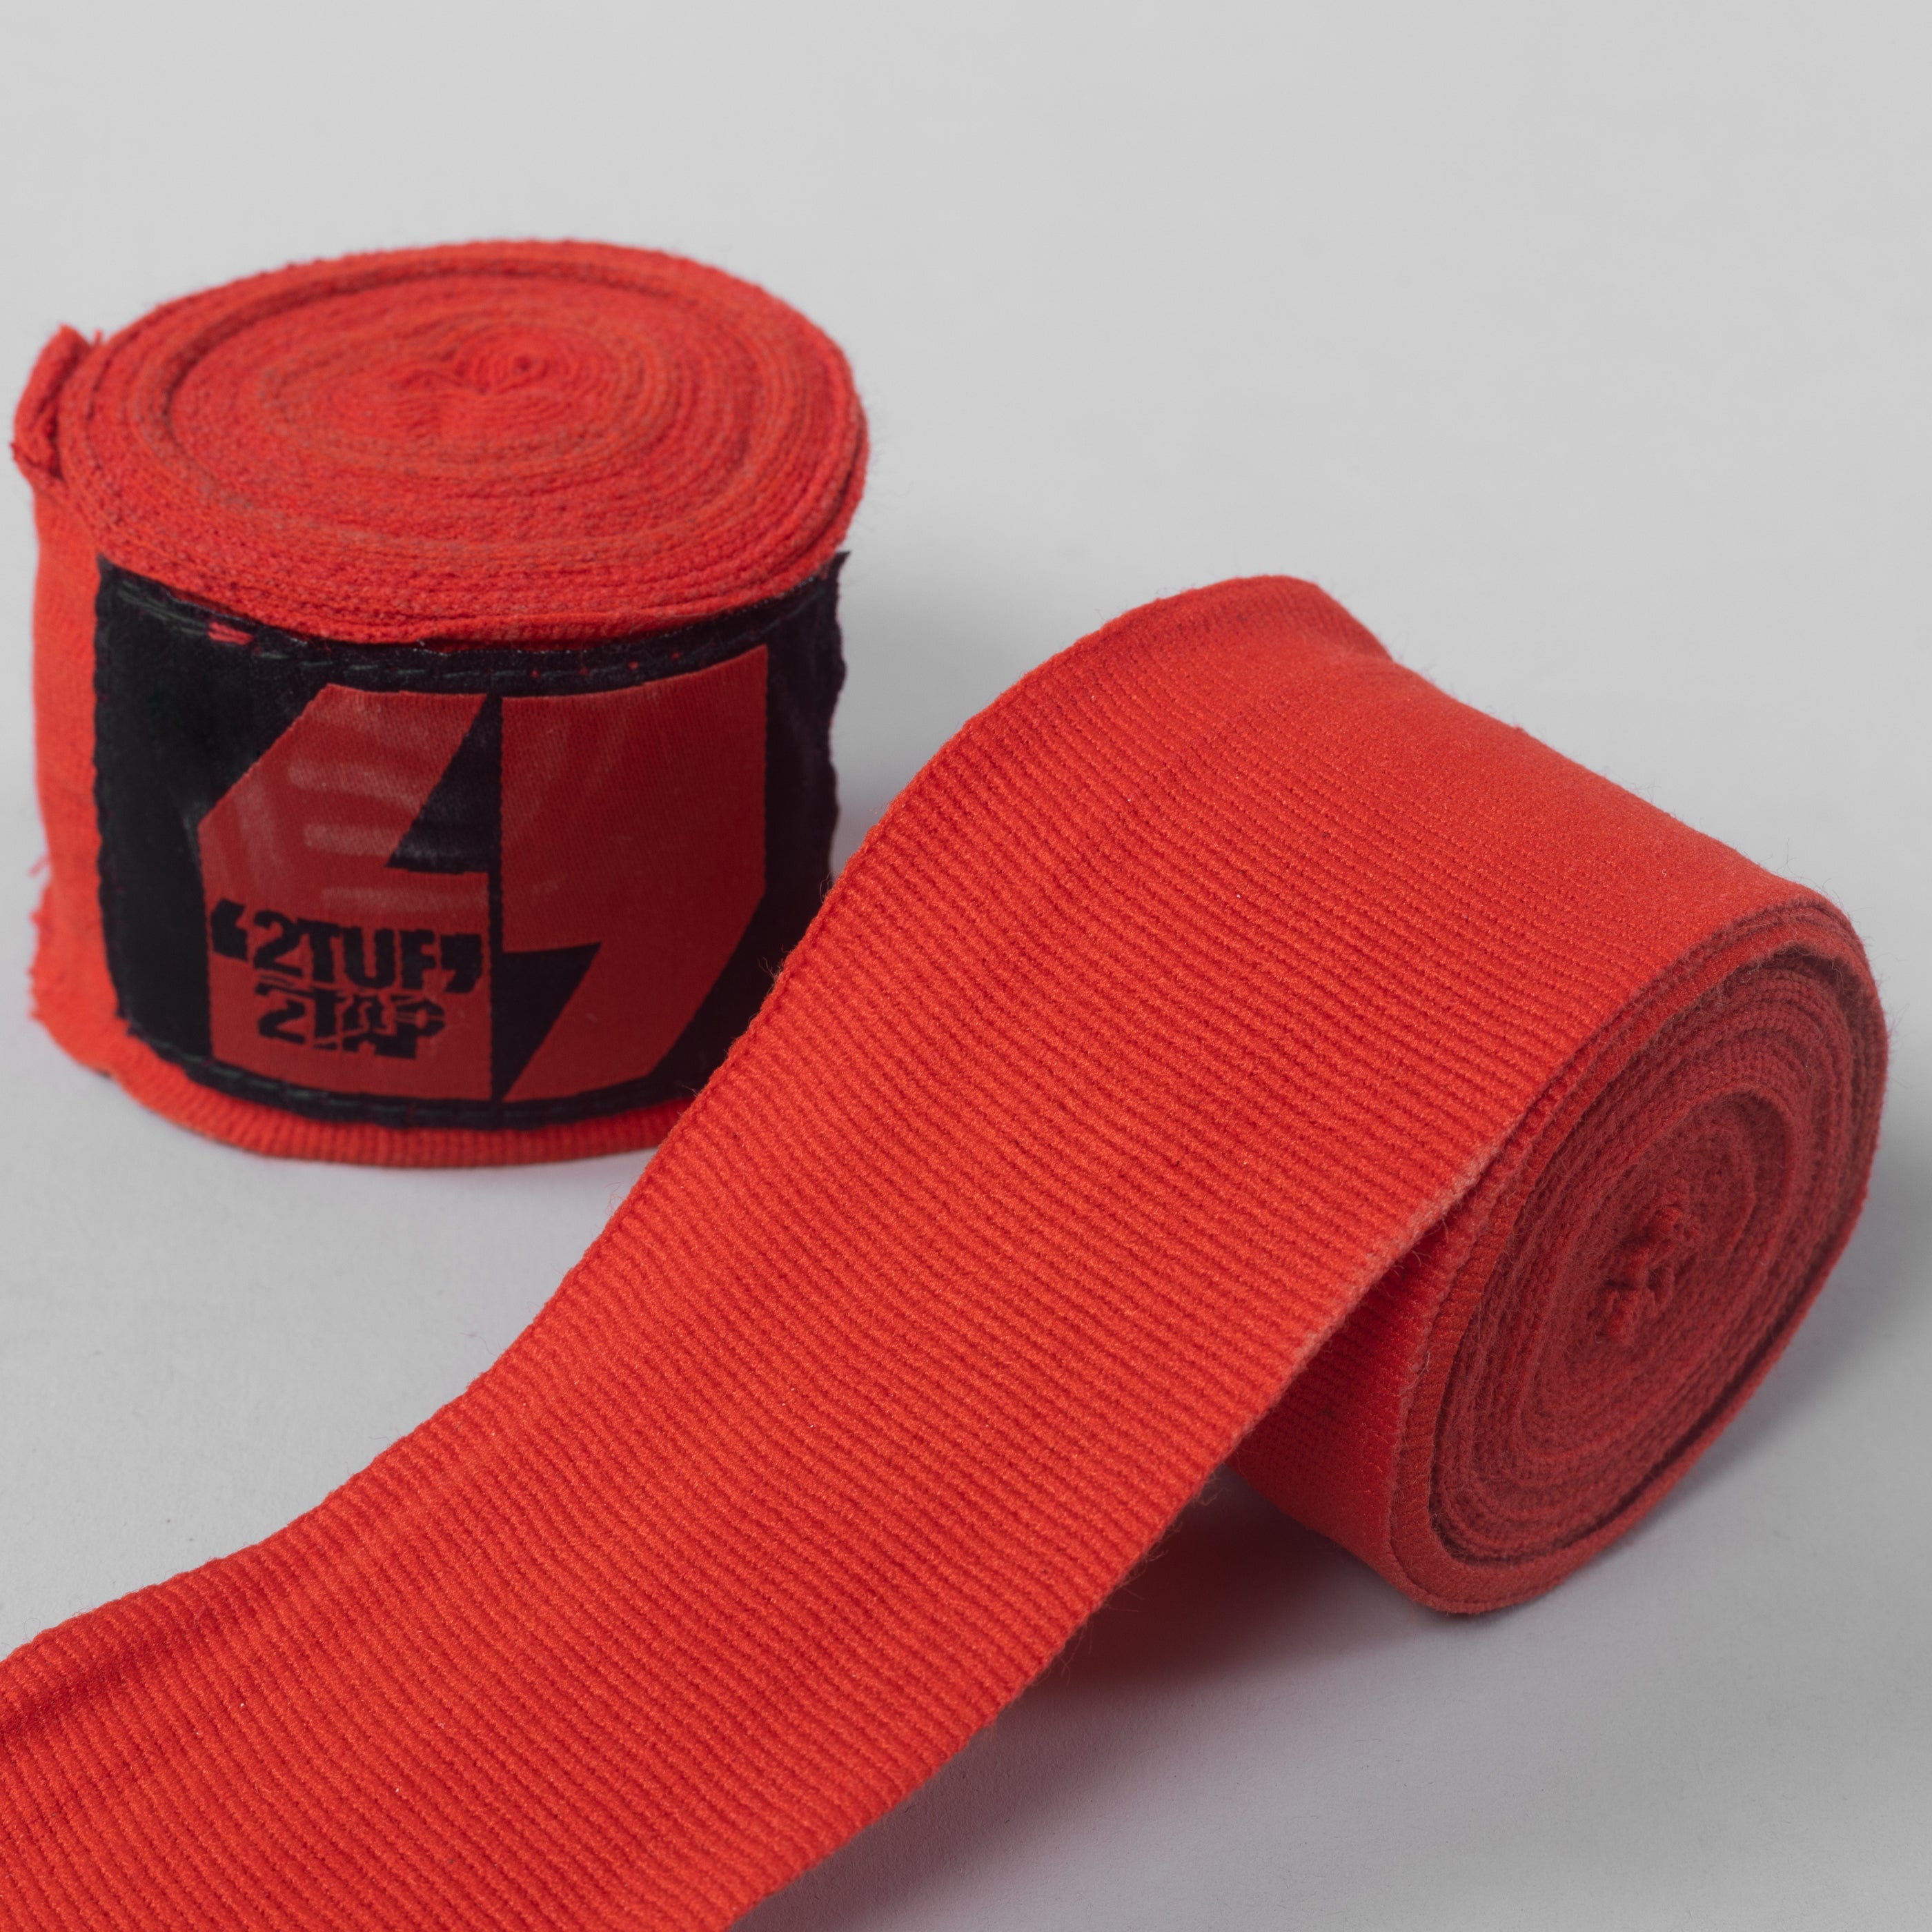 'Strykr' Boxing Hand Wraps - Red/Black 2TUF2TAP